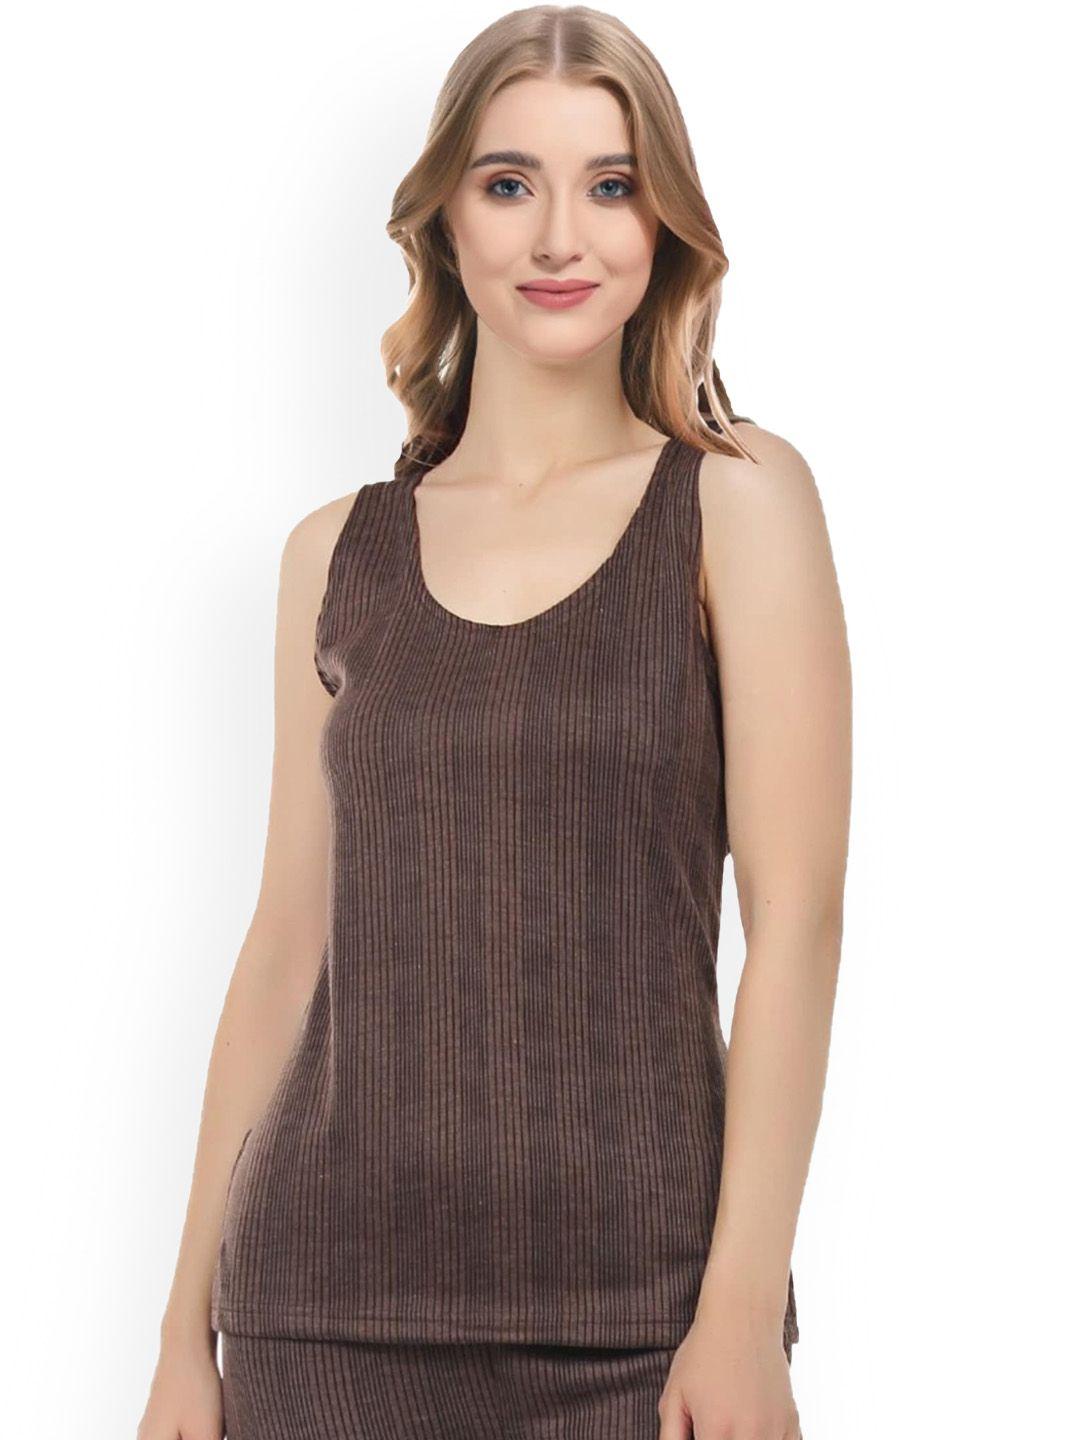 funahme striped sleeveless thermal top